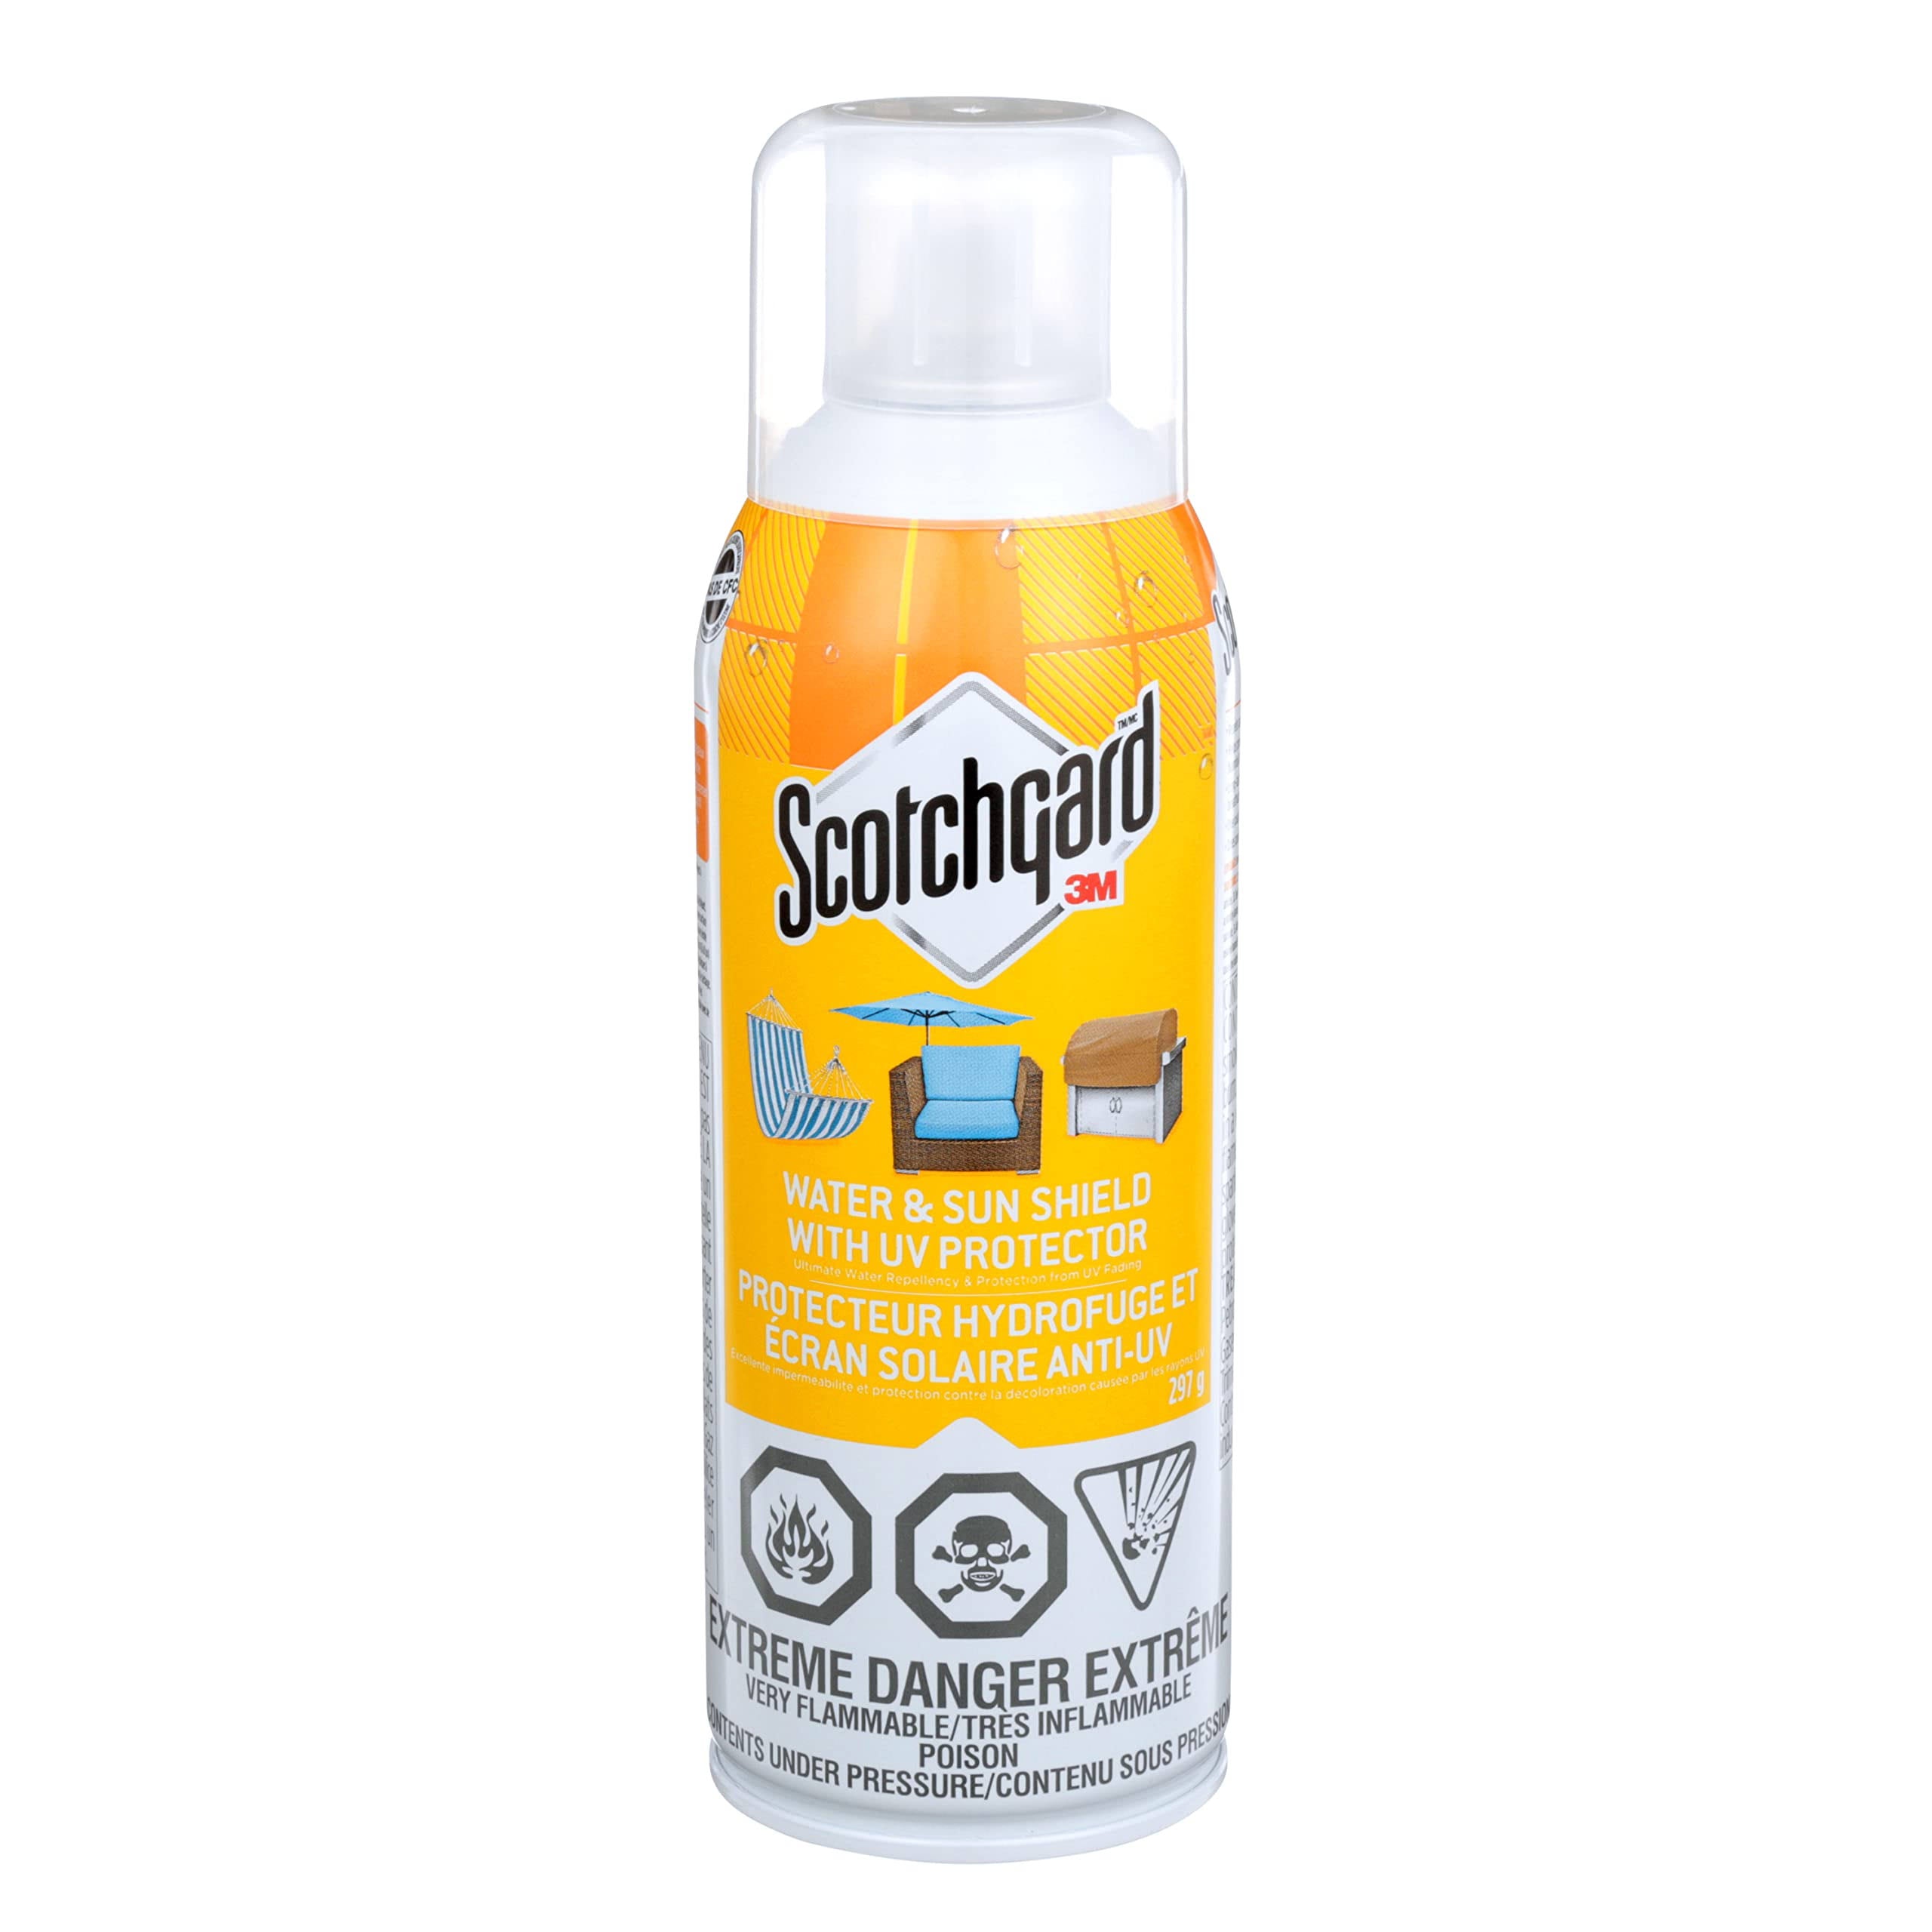  Water and Sun Shield with UV Protector Scotchgard™ display